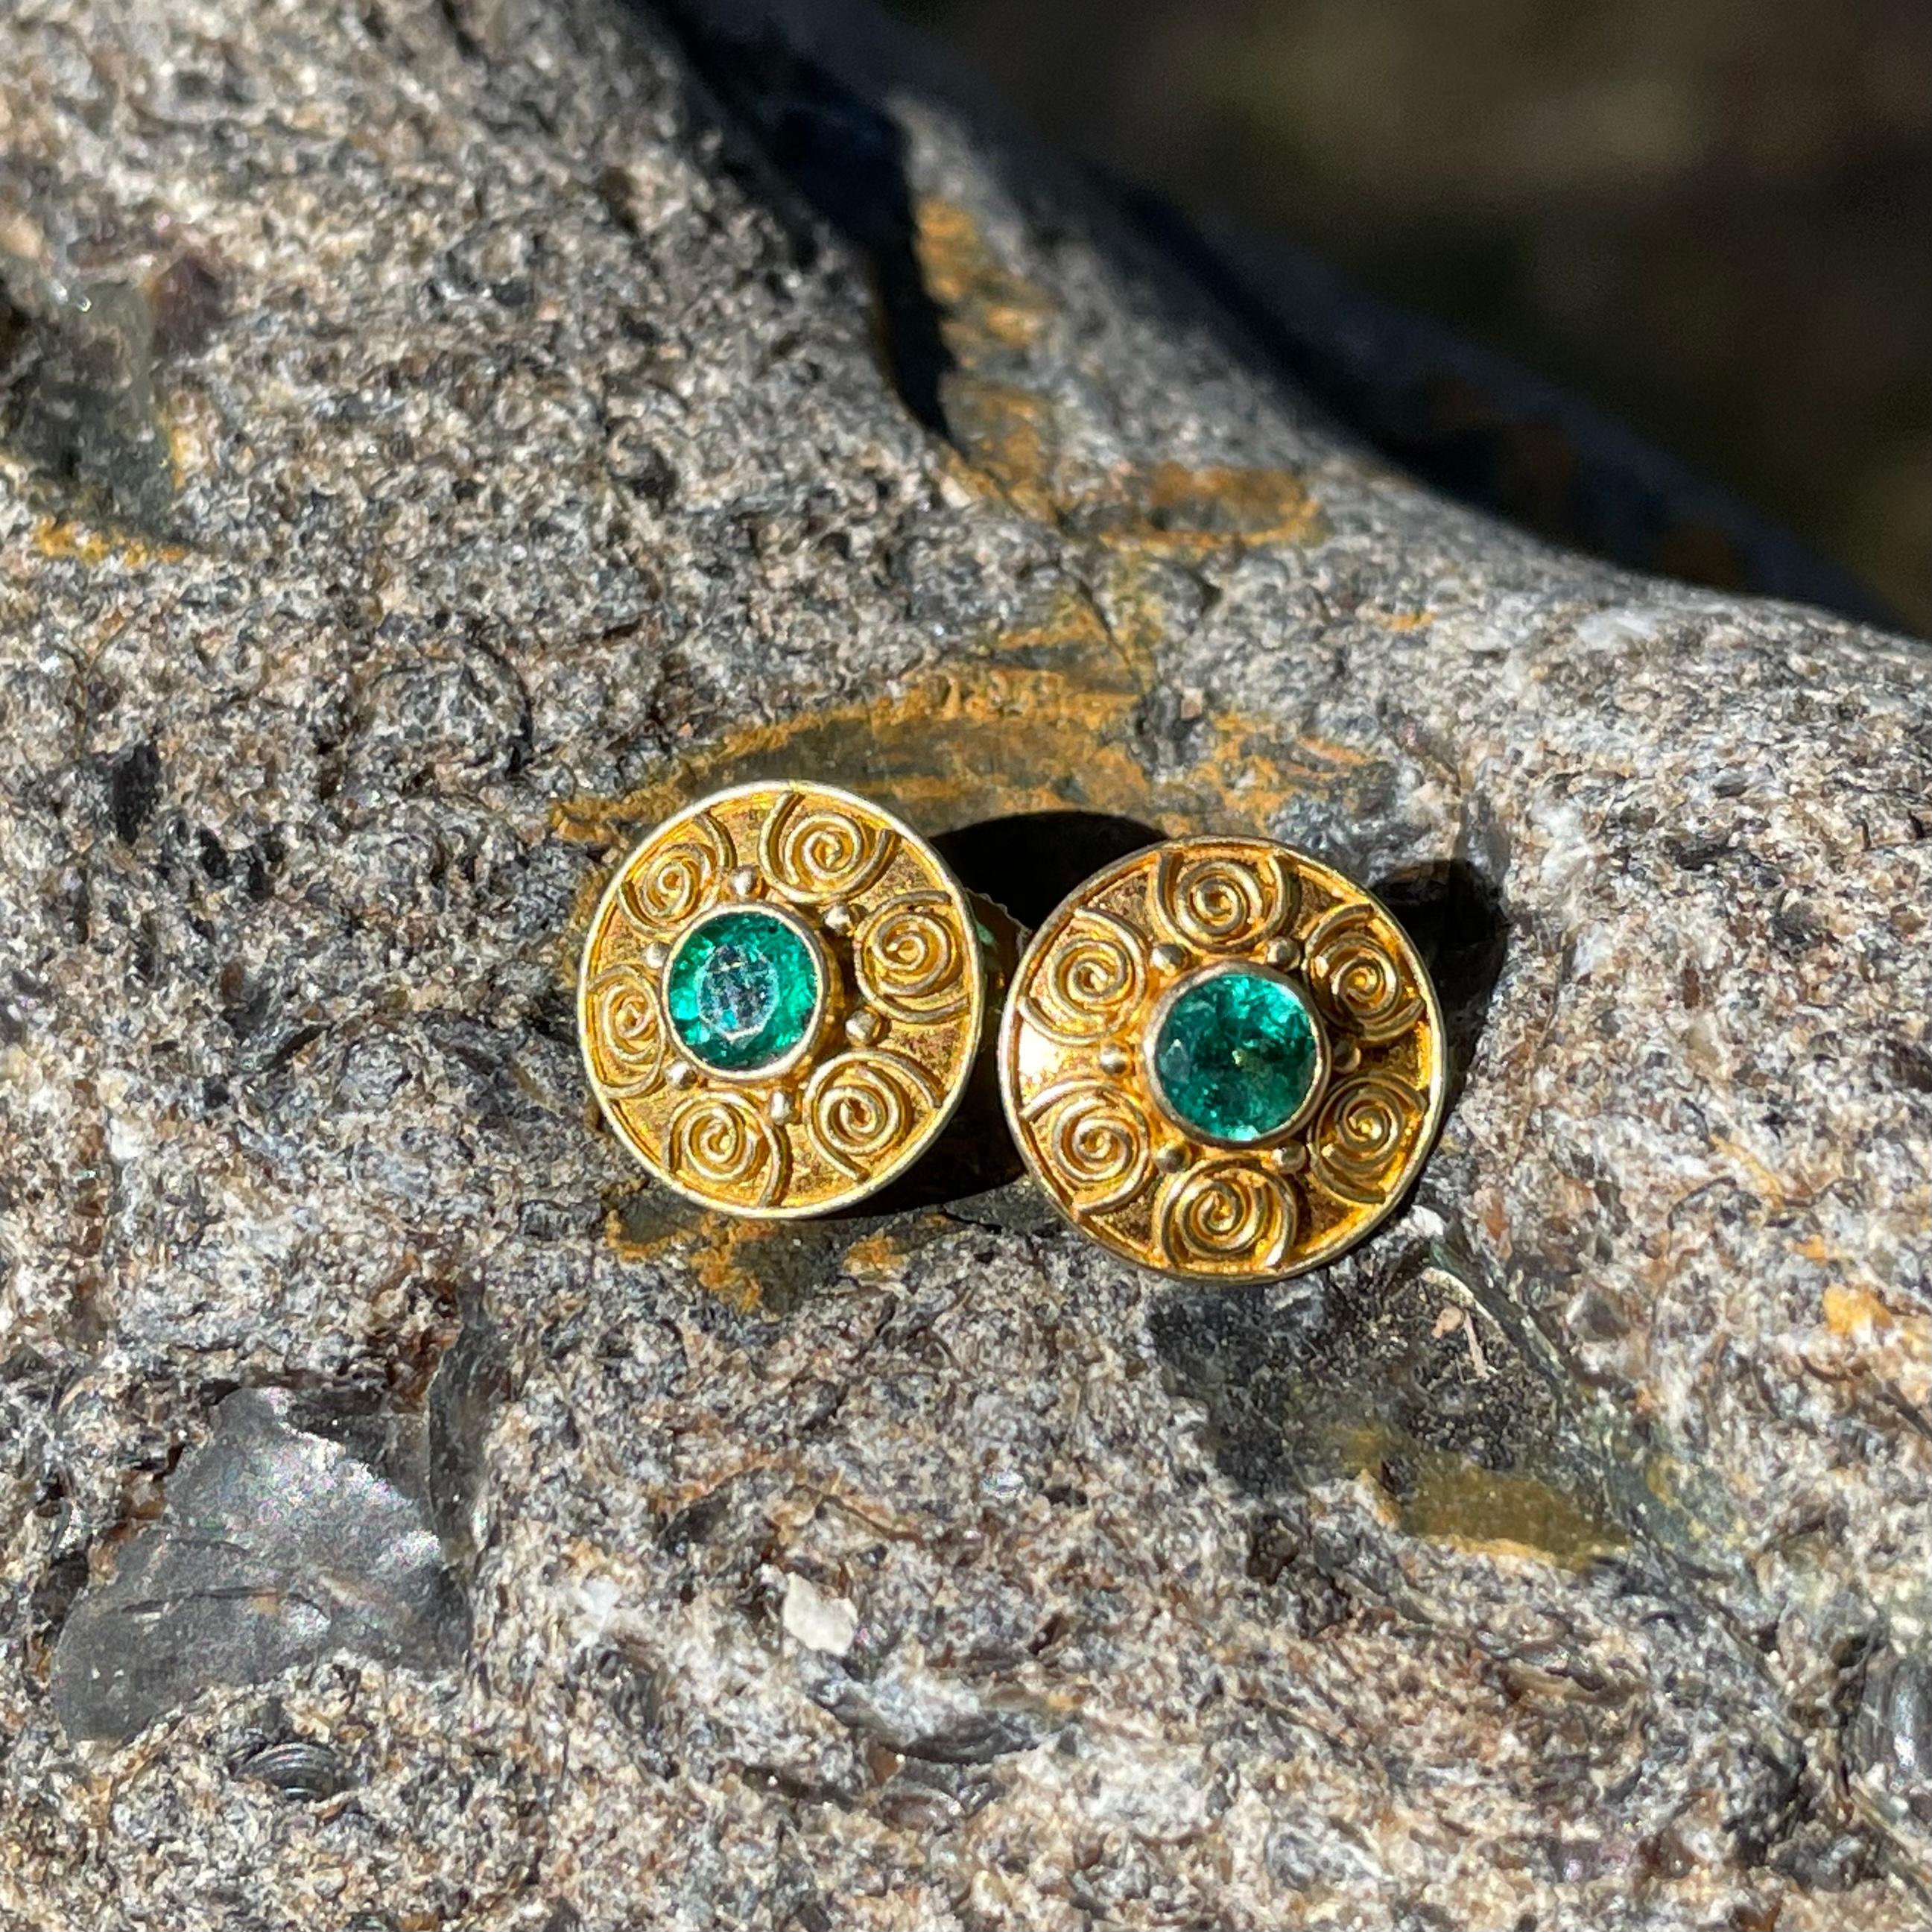 Two brilliant 4mm round faceted emeralds are surrounded by multiple hand applied spirals in this ancient-inspired handmade design. Overall diameter is 11mm.  A nice matte-finish completes these beauties.